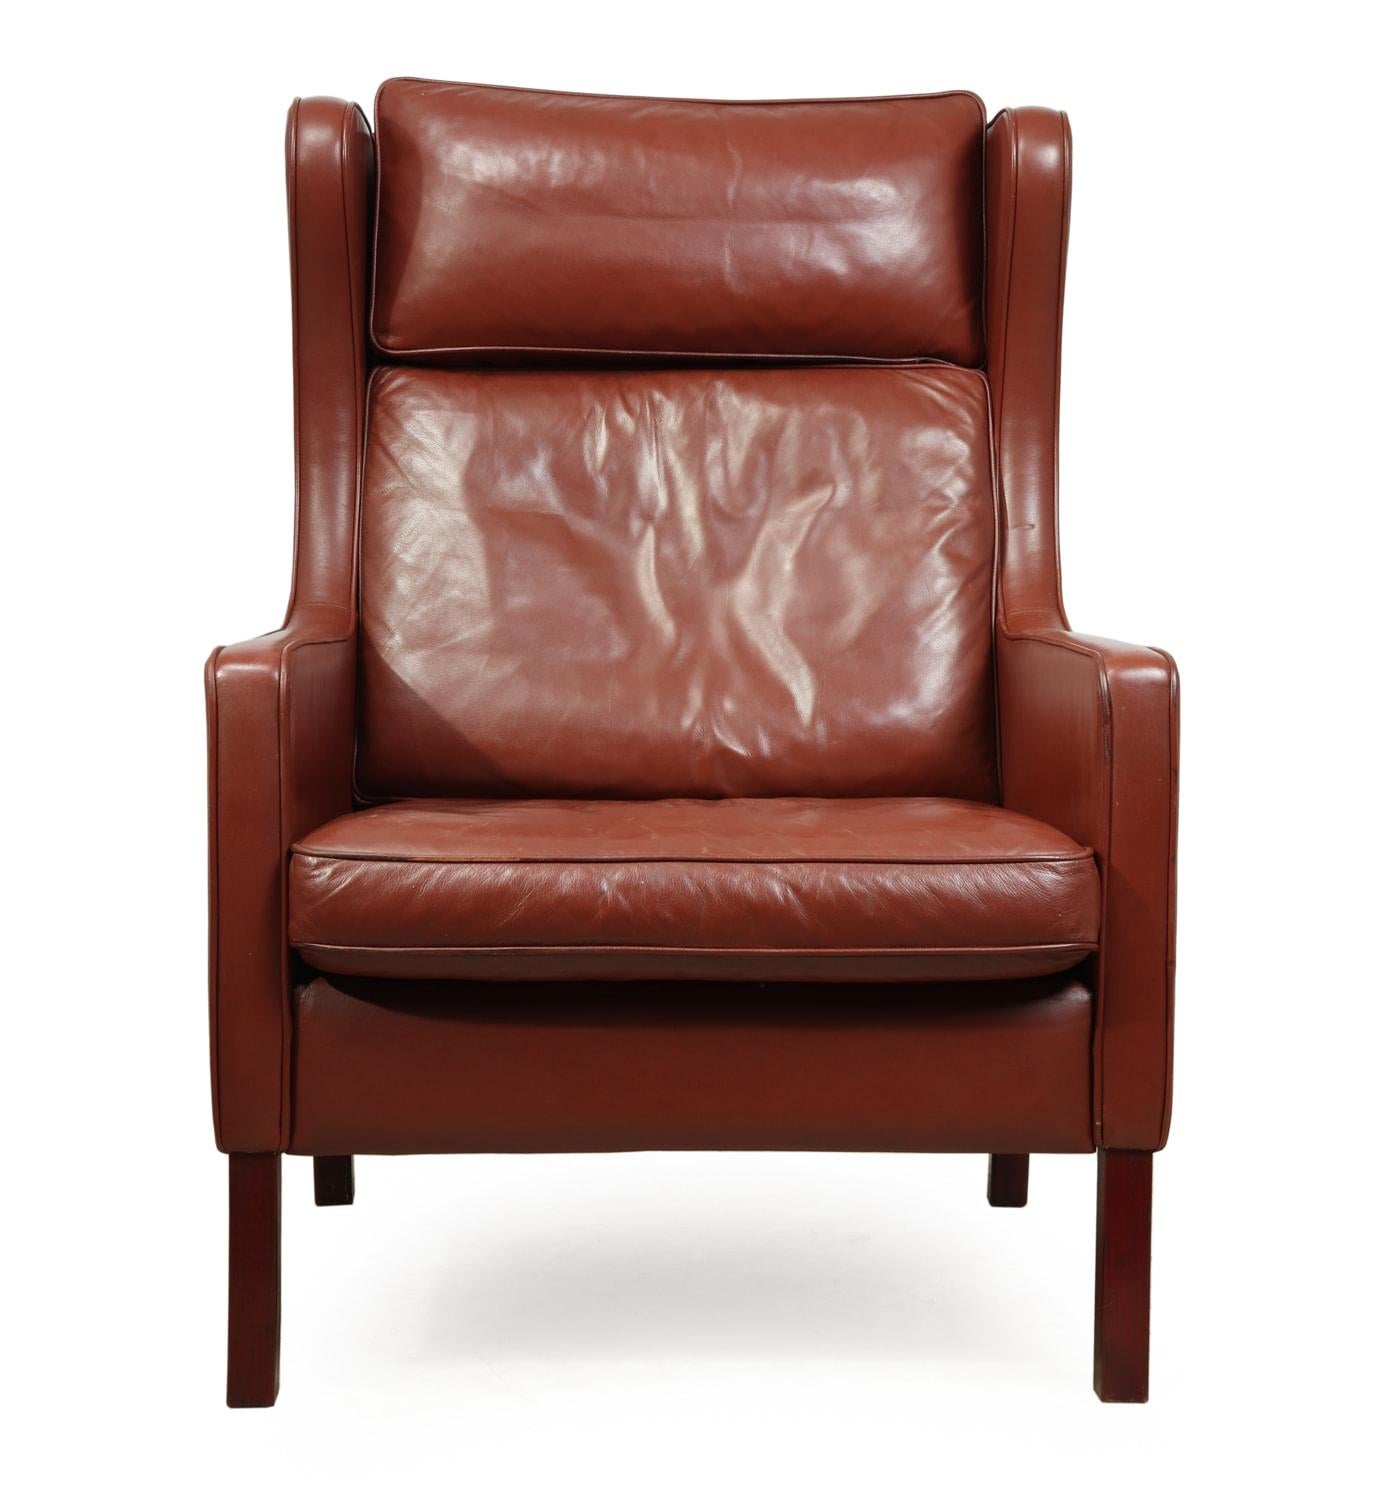 Midcentury Danish leather wing chair by Stouby, circa 1970
A good quality wing chair in tan leather by renowned Danish maker Stouby, produced in thick Hyde leather, in very good condition throughout with minimal wear

Age: 1970

Style: